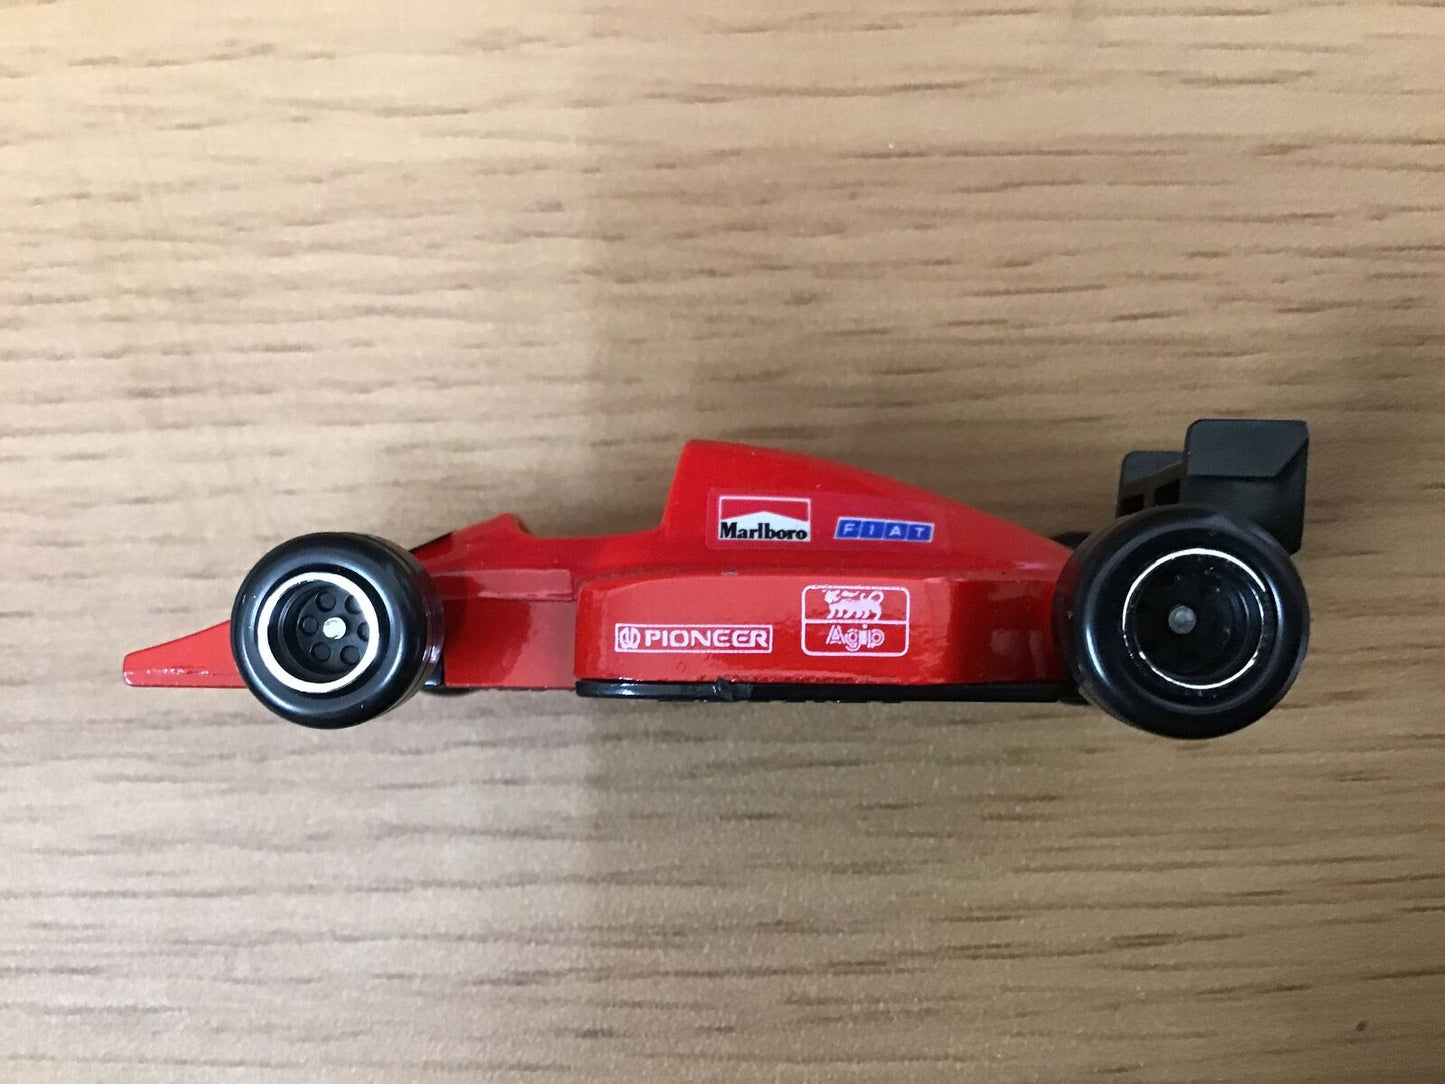 Y0112 TOMICA Ferrari F-1 seal with red box TAKARA TOMY vintage car from Japan